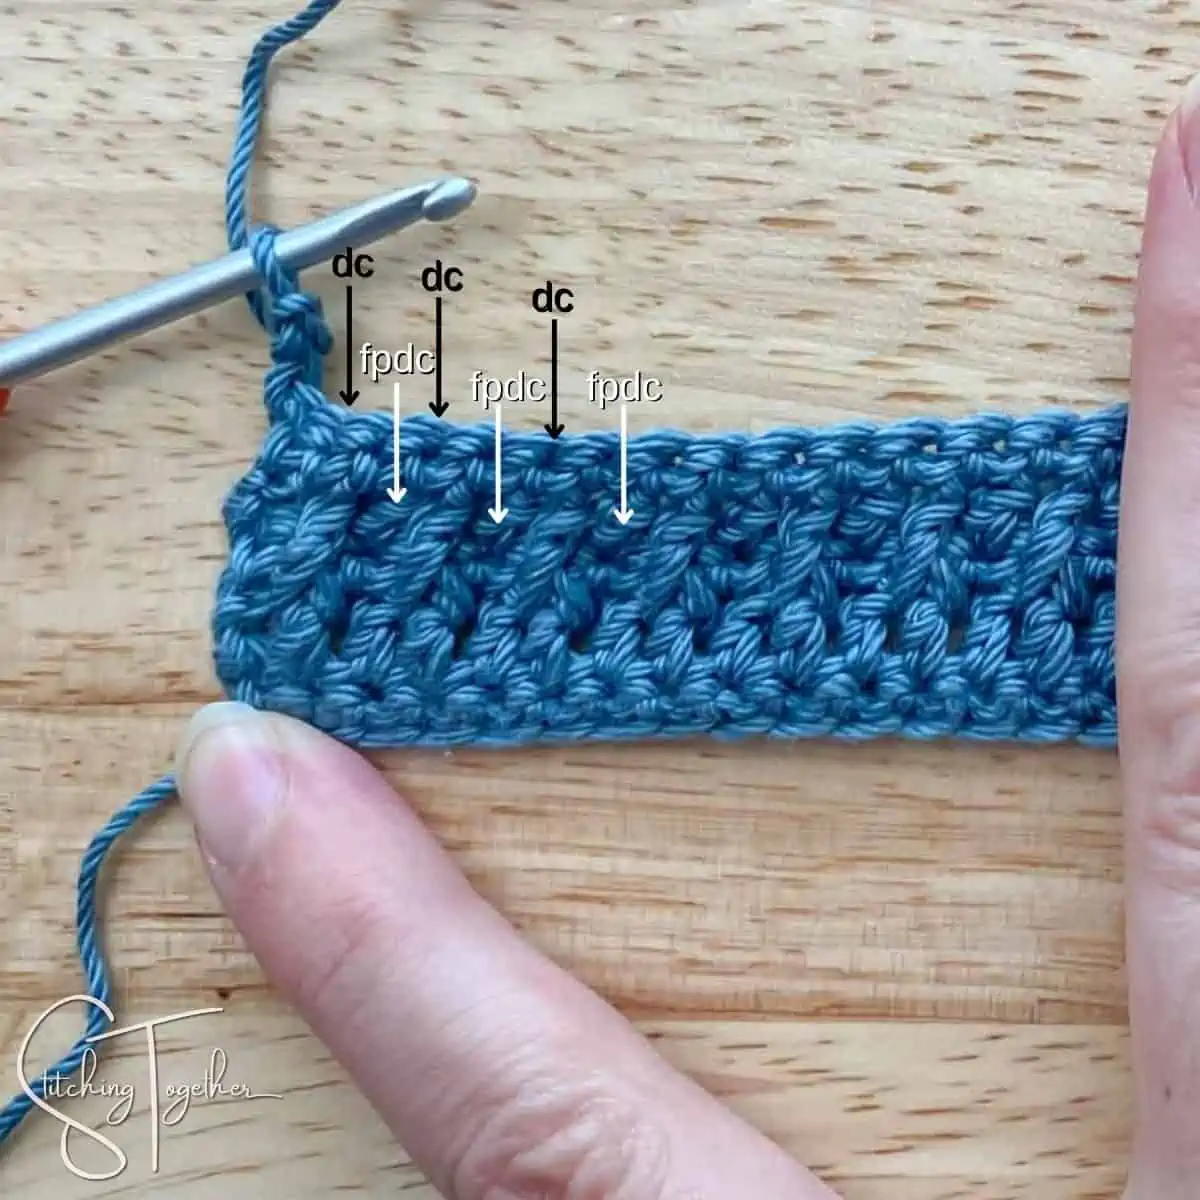 left handed crochet swatch with arrows showing where to put the dc and fpdc stitches